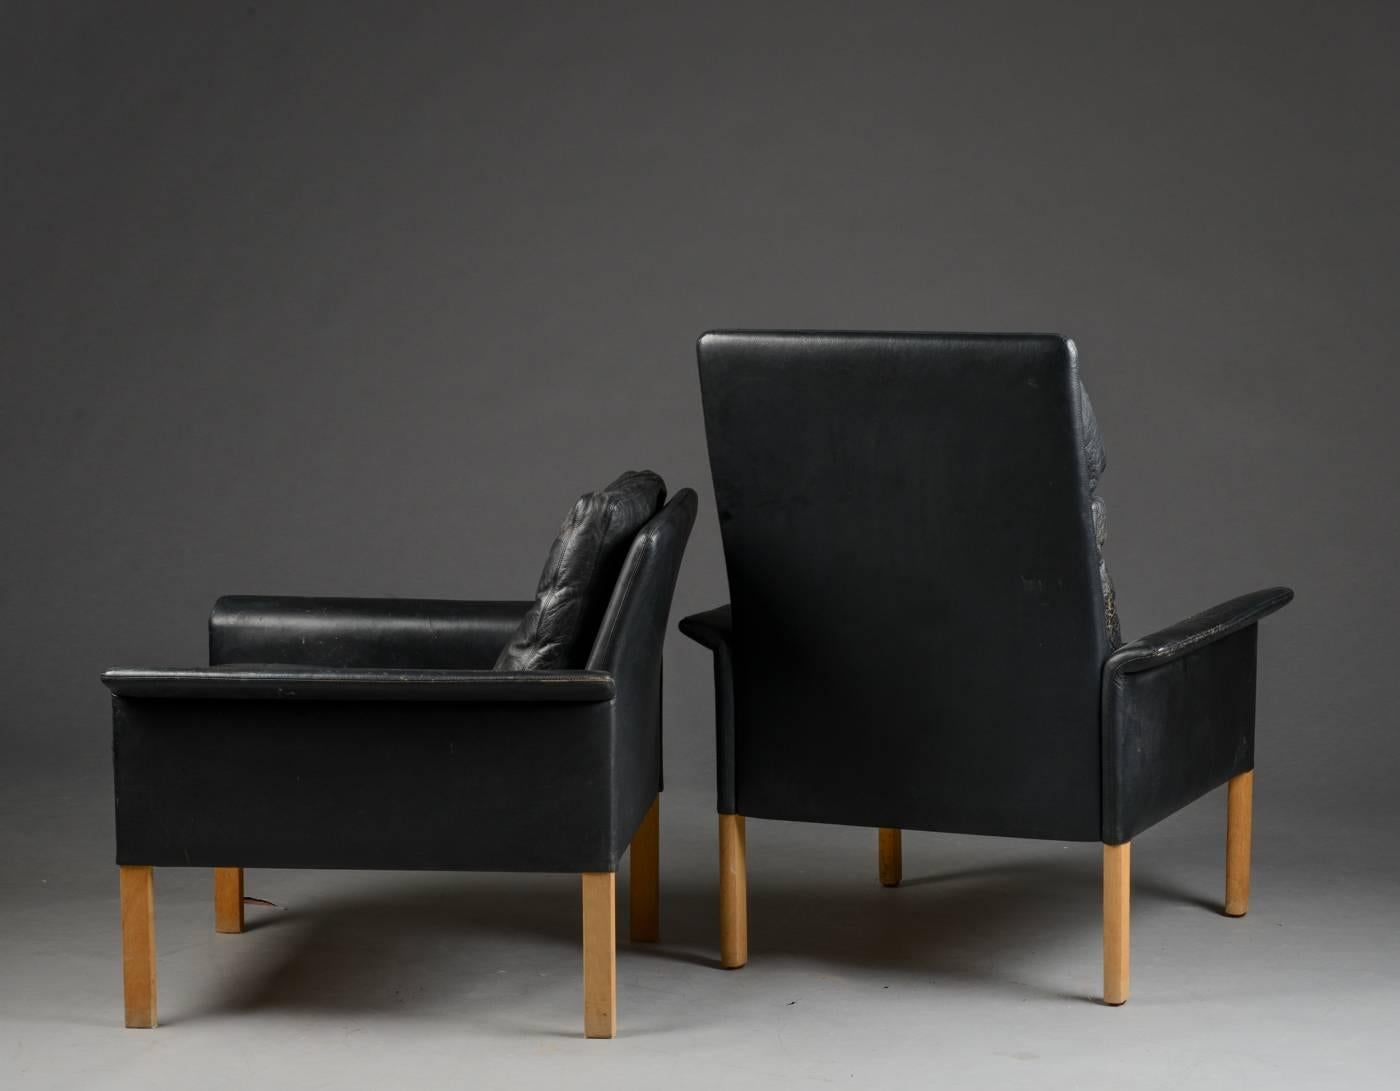 Pair of Danish Mid-Century lounge chairs and ottoman designed by Hans Olsen for Brande Mobelfabrik. Upholstered cushions and frames in original black leather. Raised on solid oak legs.